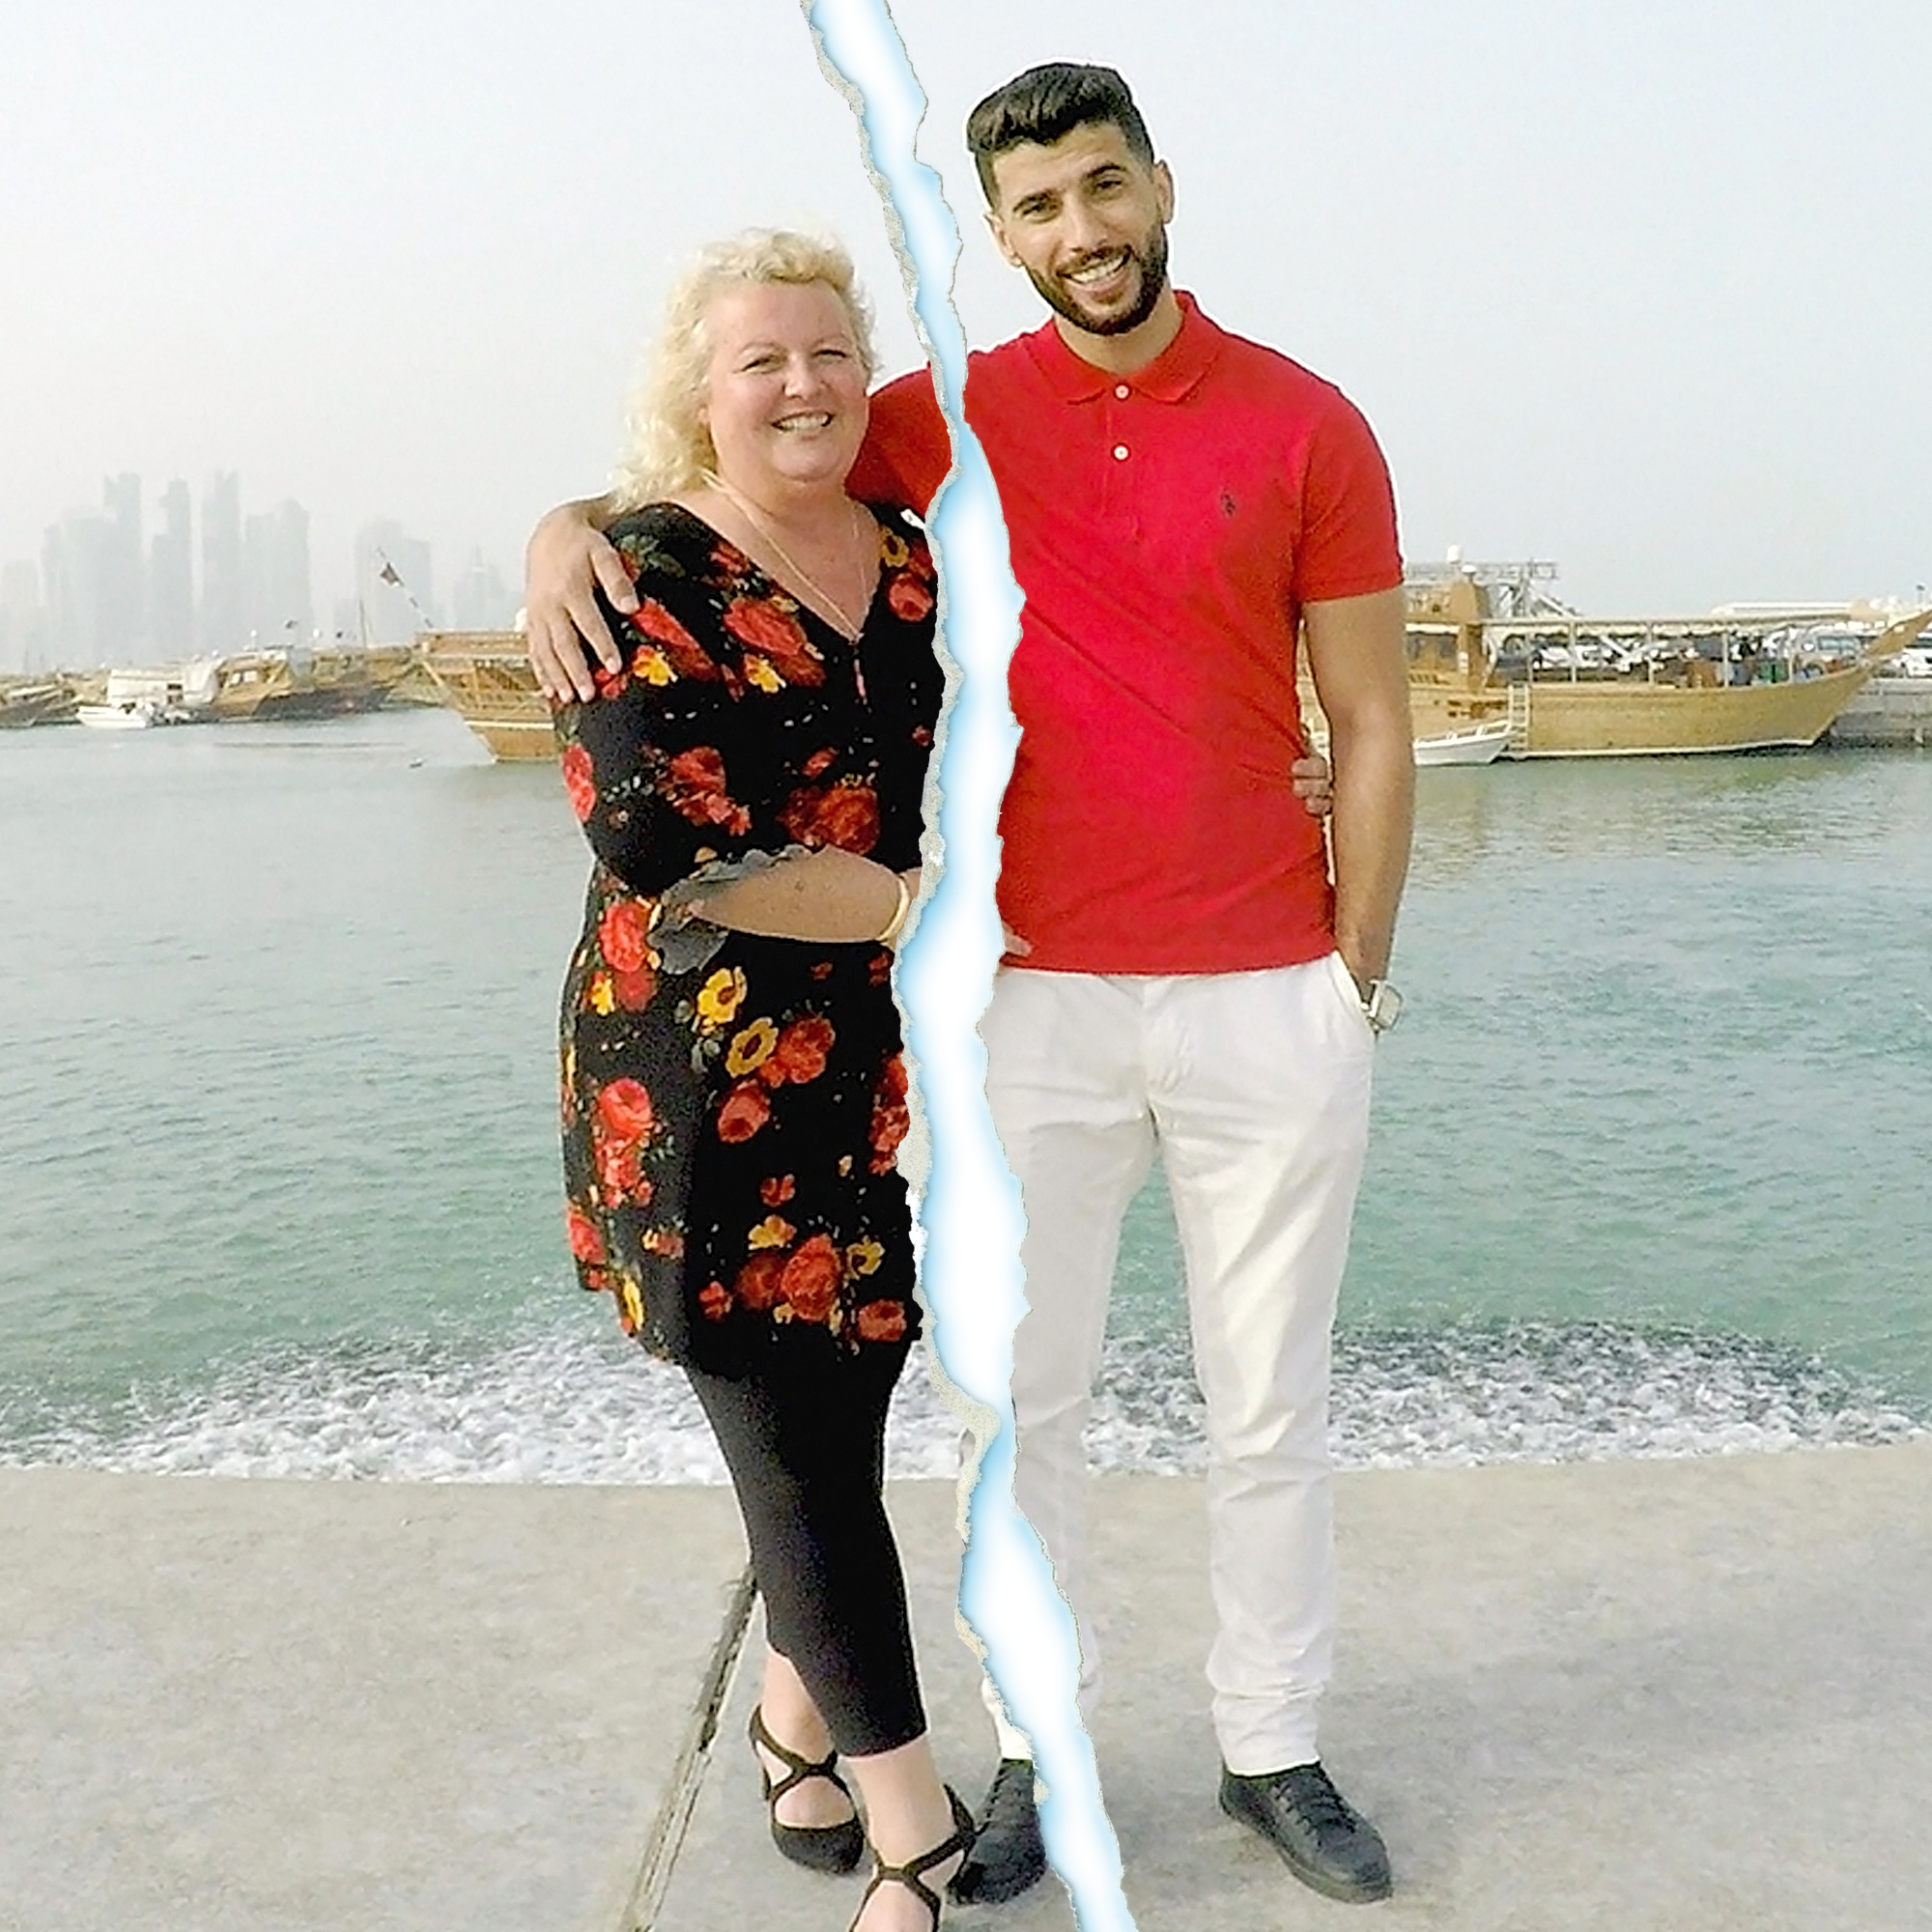 90 day fiance aladin and laura